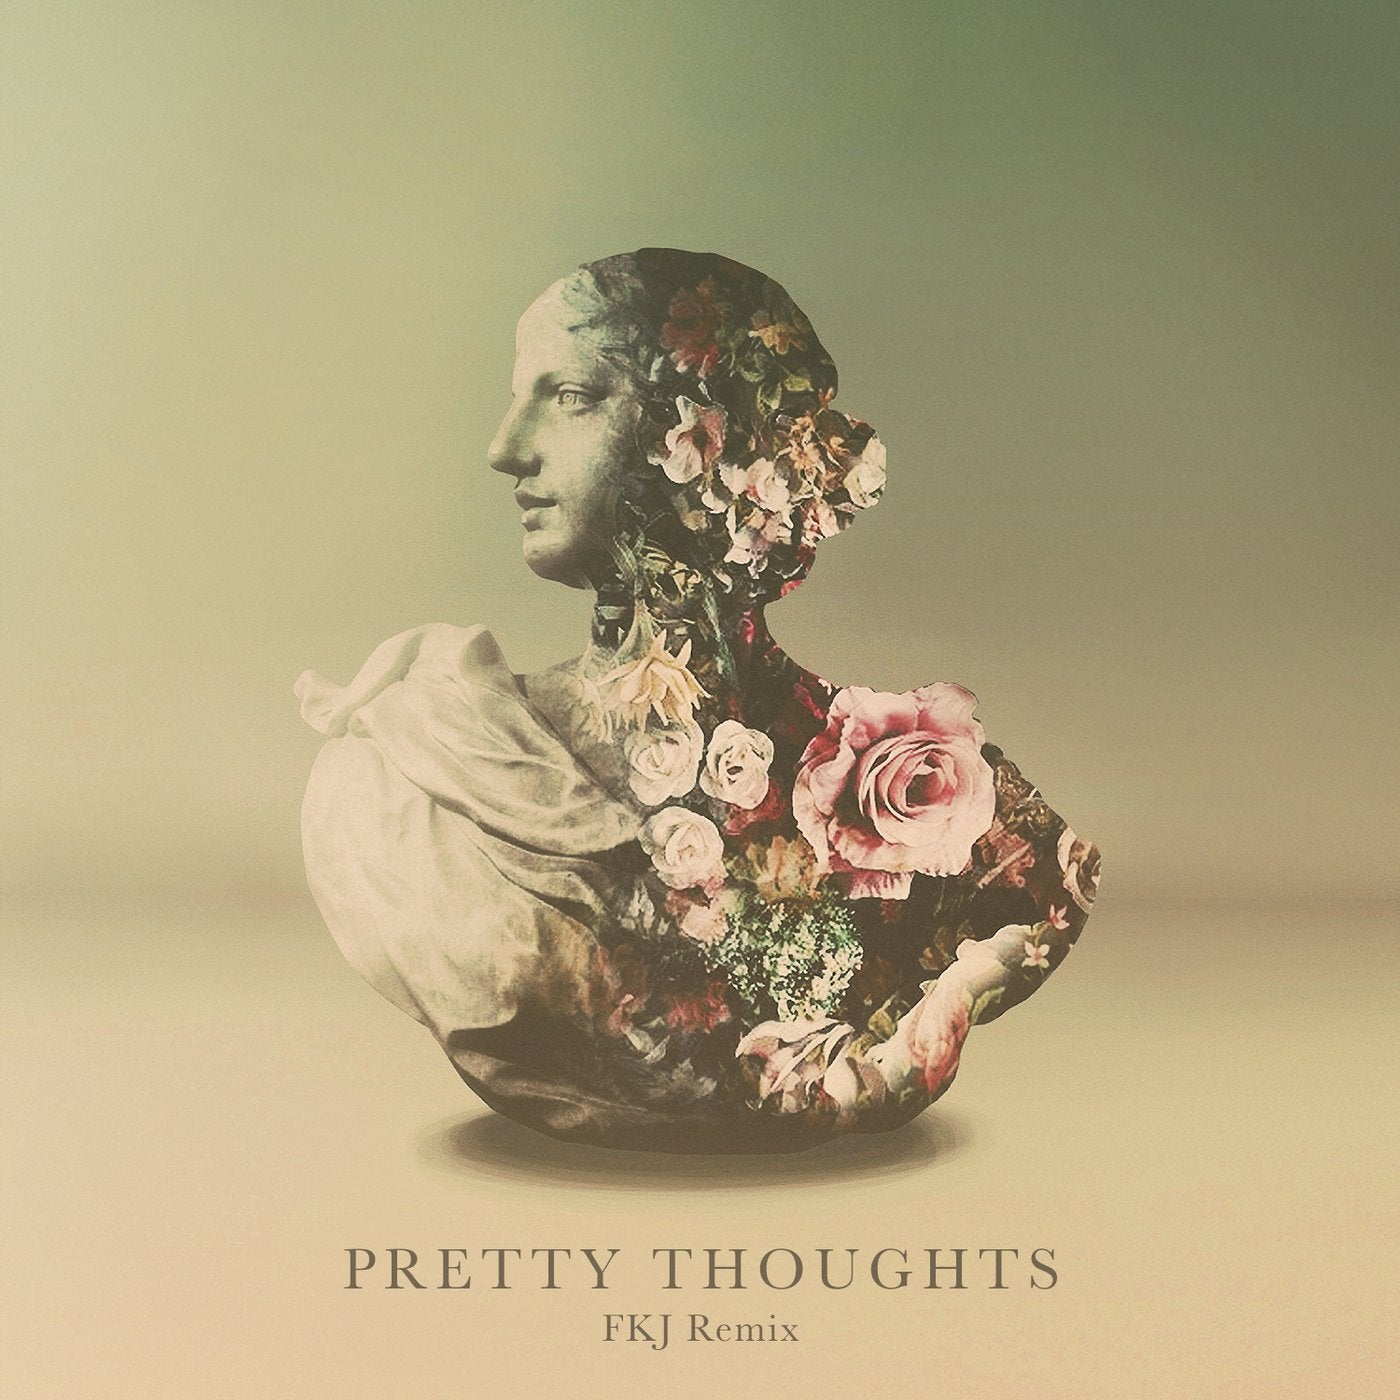 Pretty Thoughts - FKJ Remix